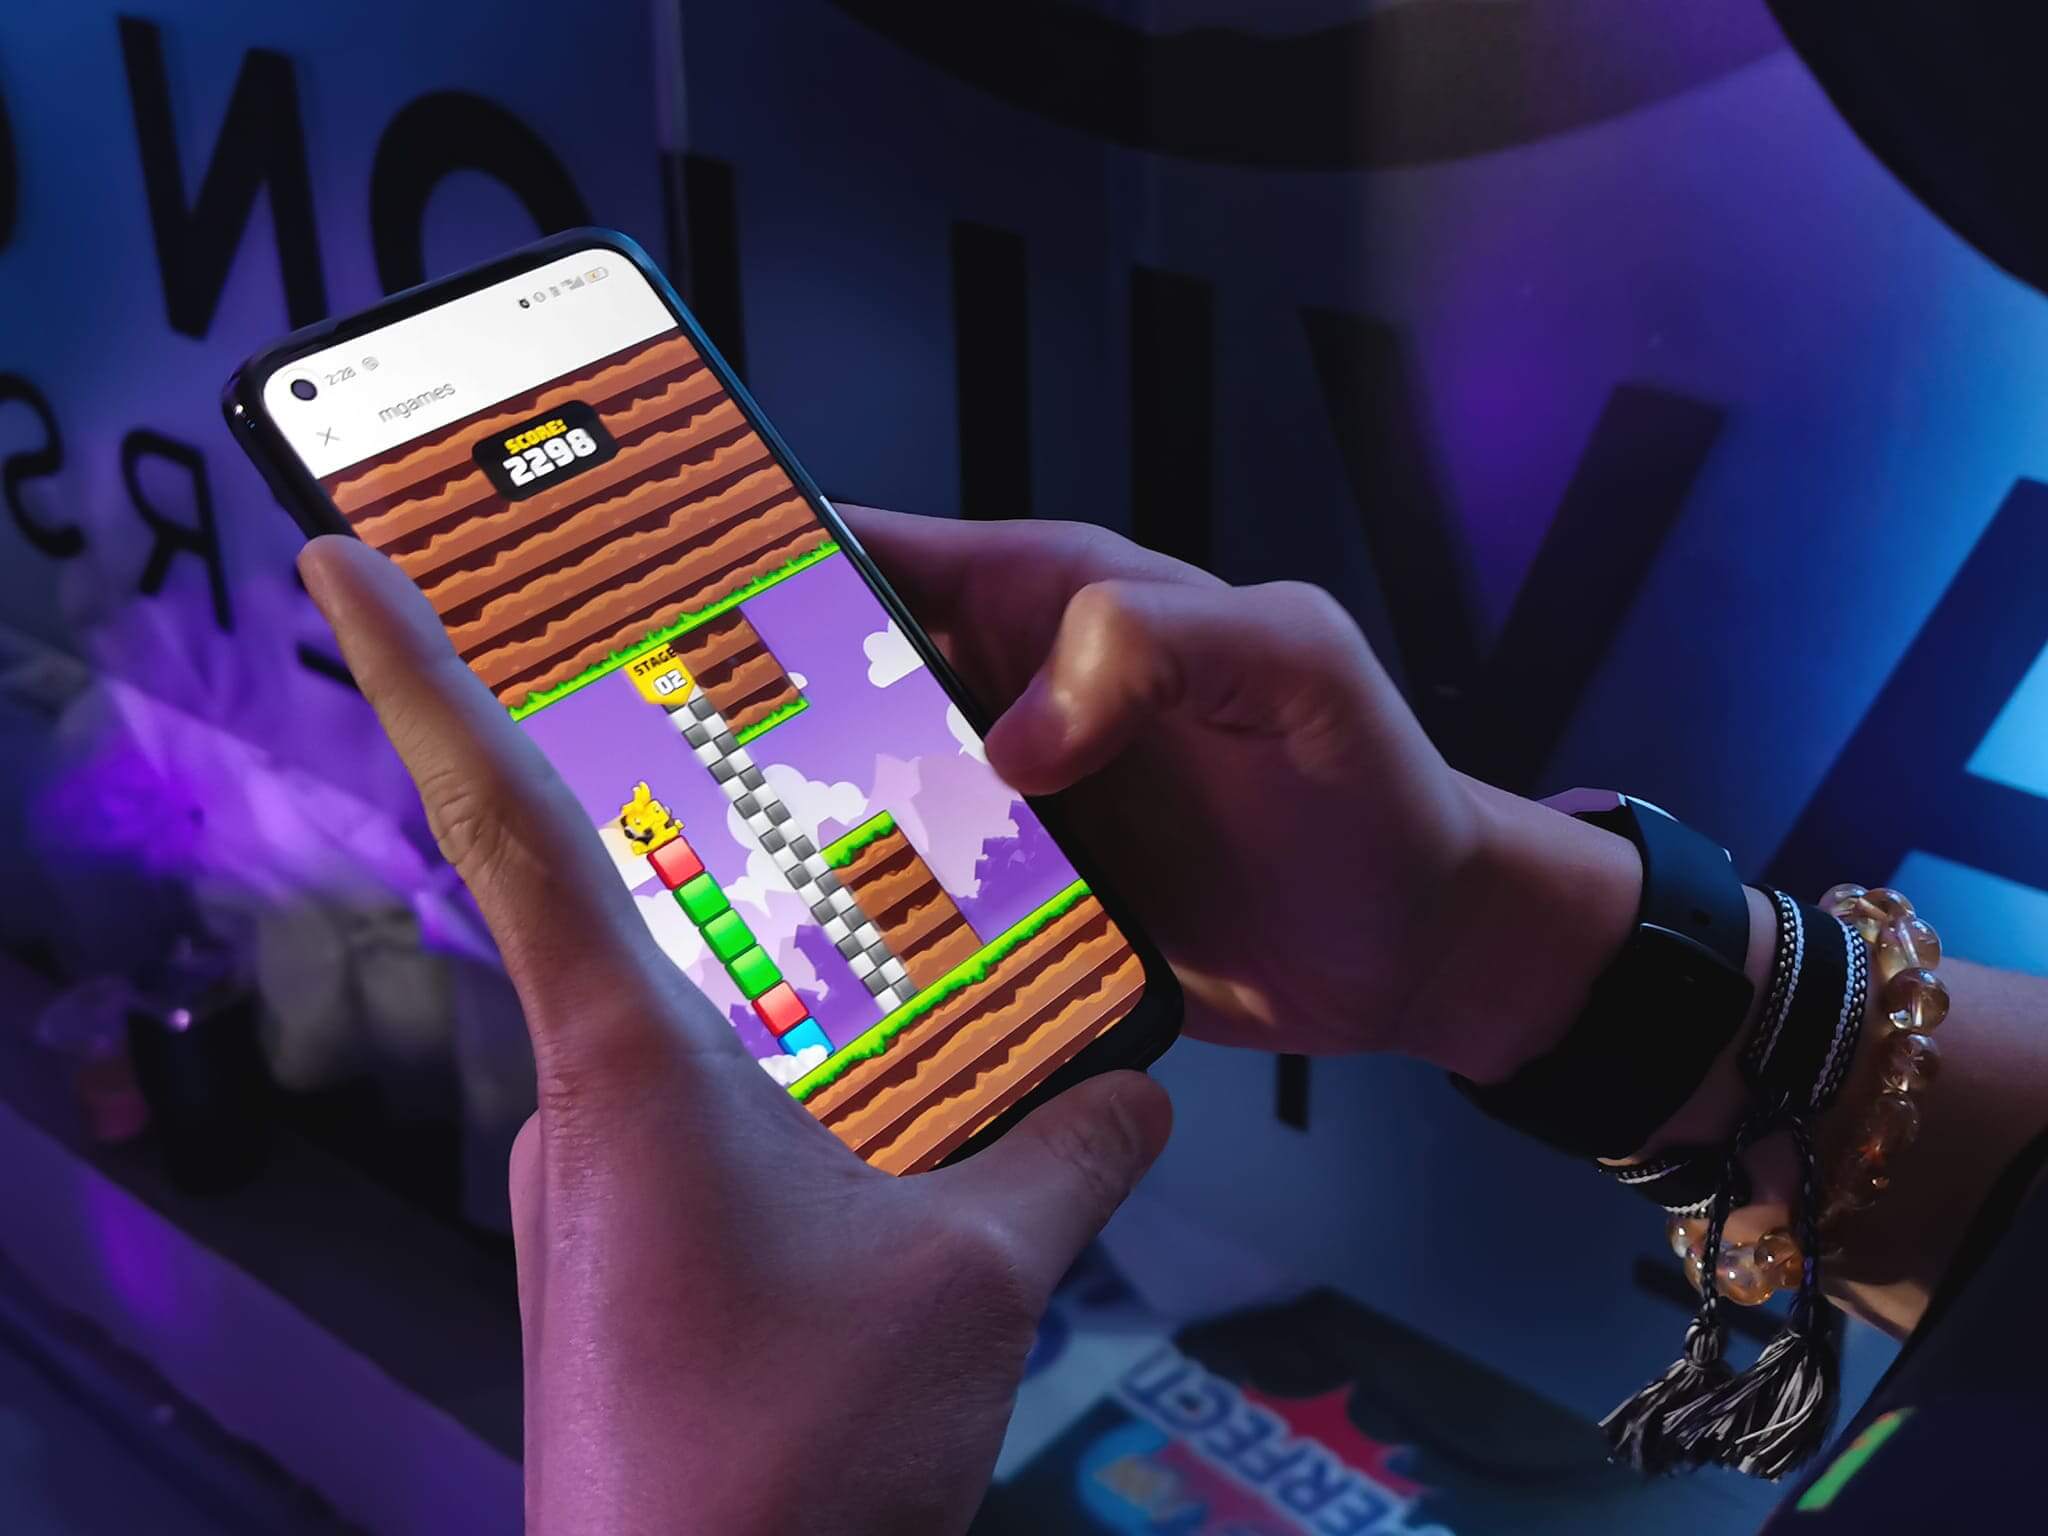 Rakuten Viber in partnership with Mineski Global brings hypercasual gaming to a whole new level